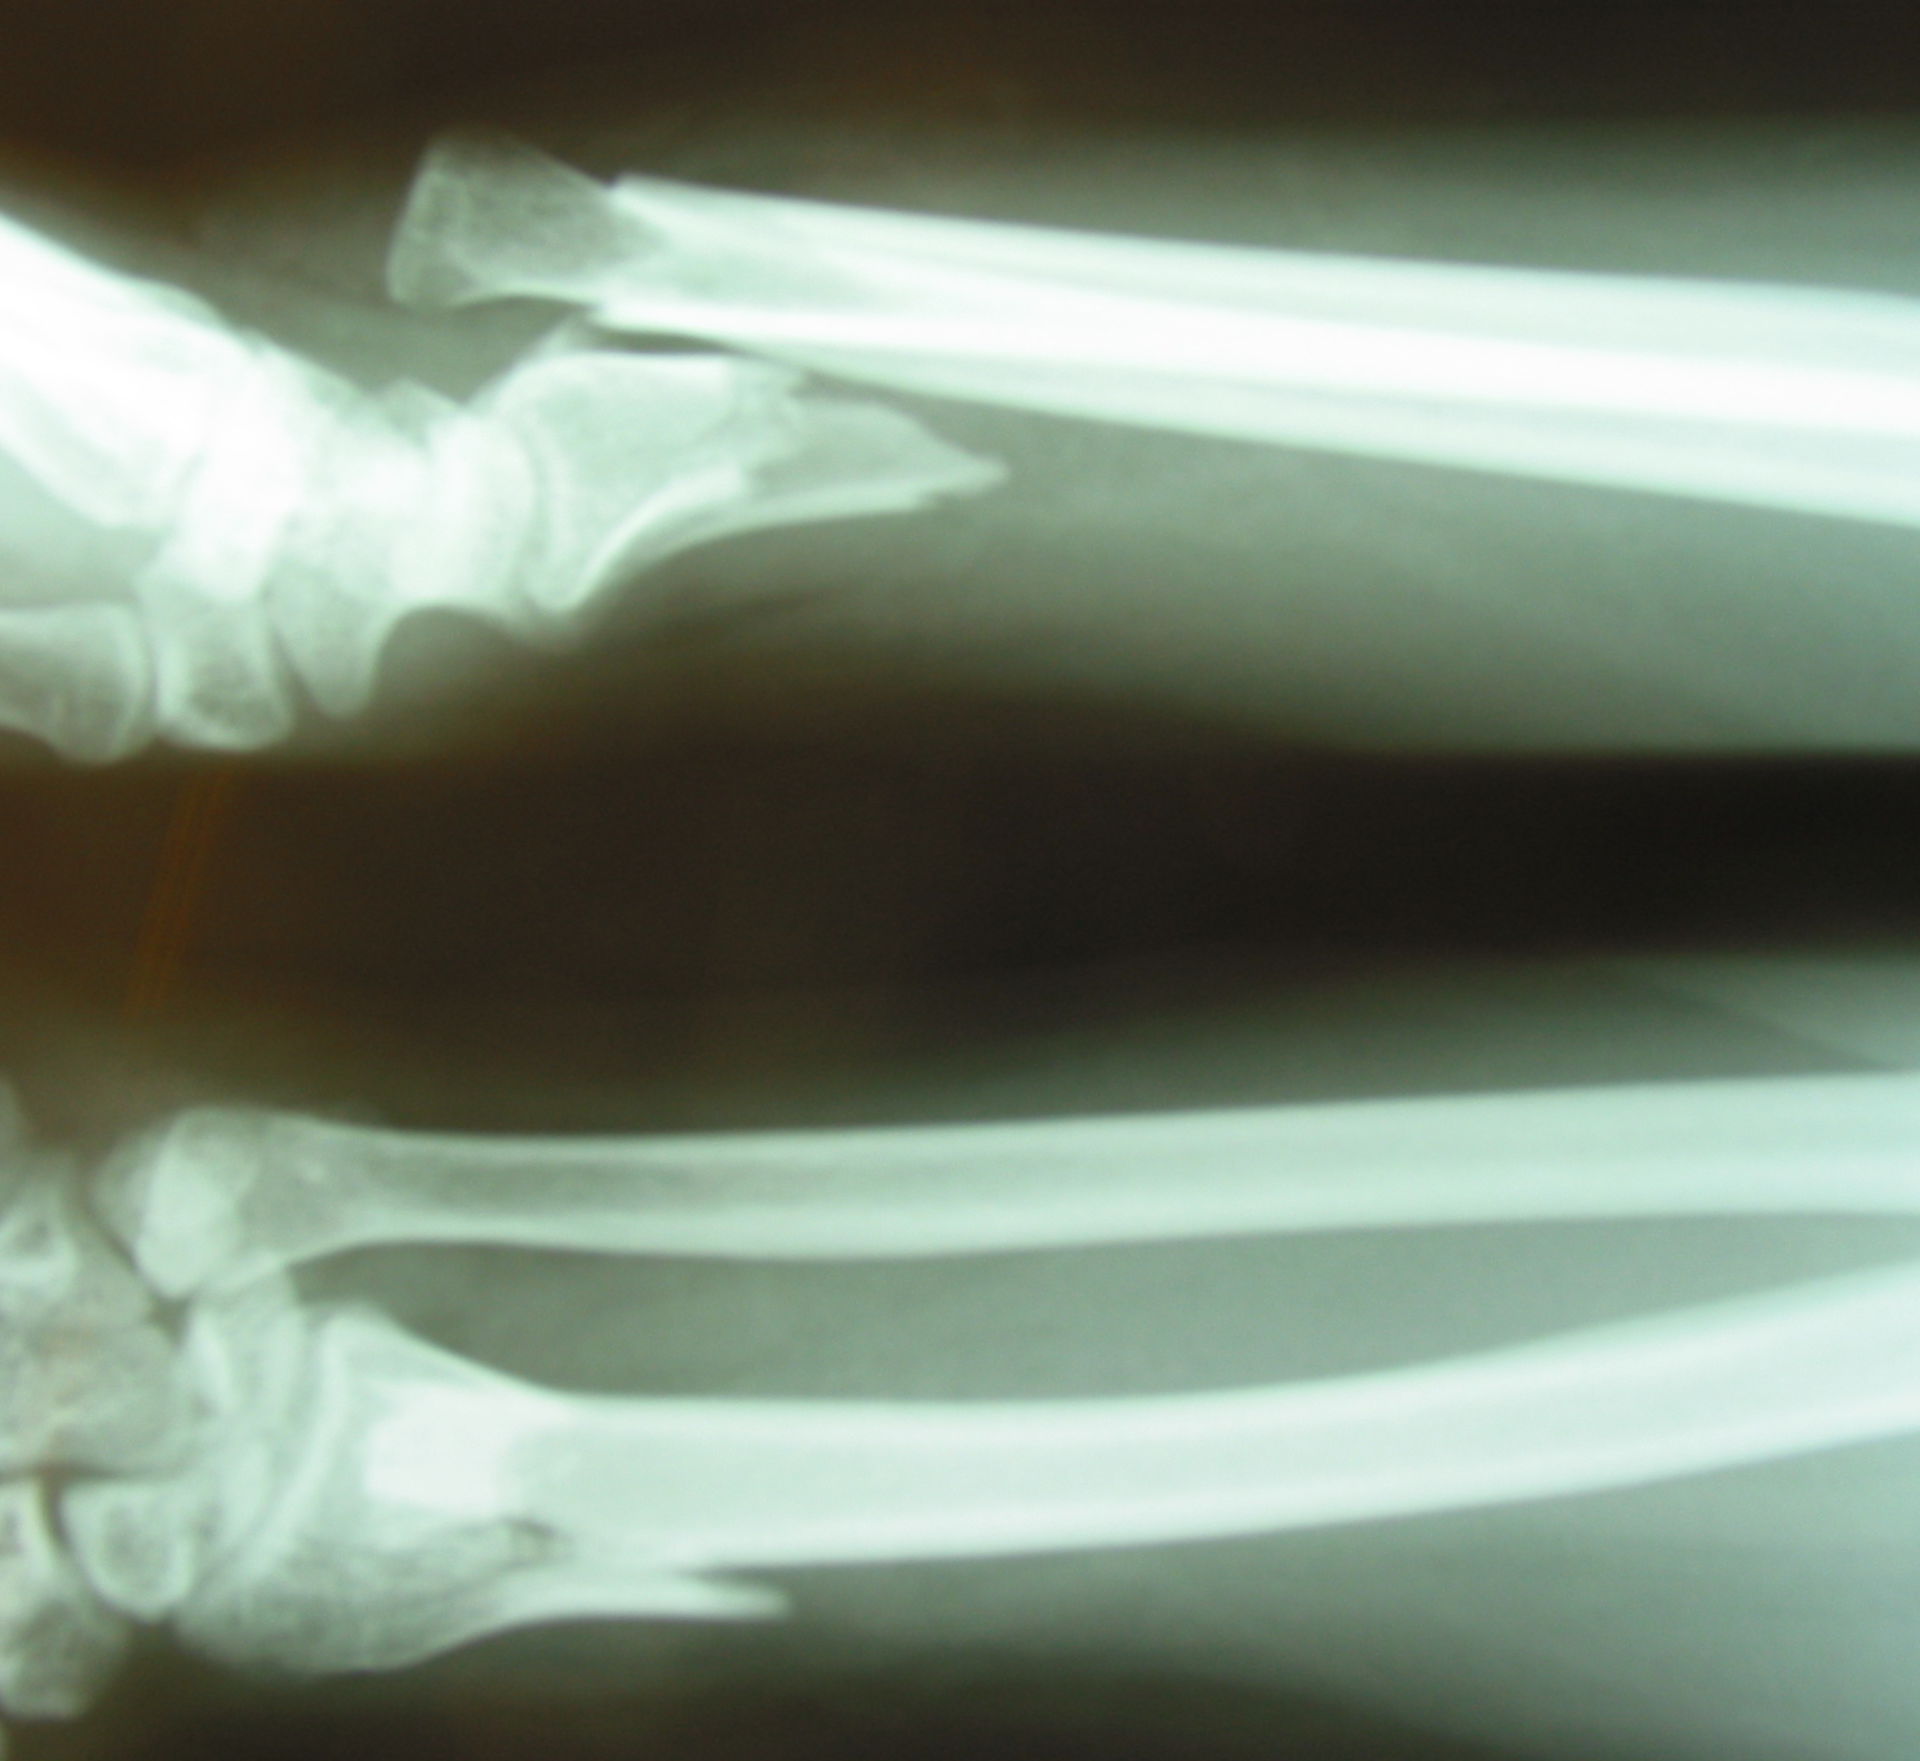 Galeazzi fracture, X-ray